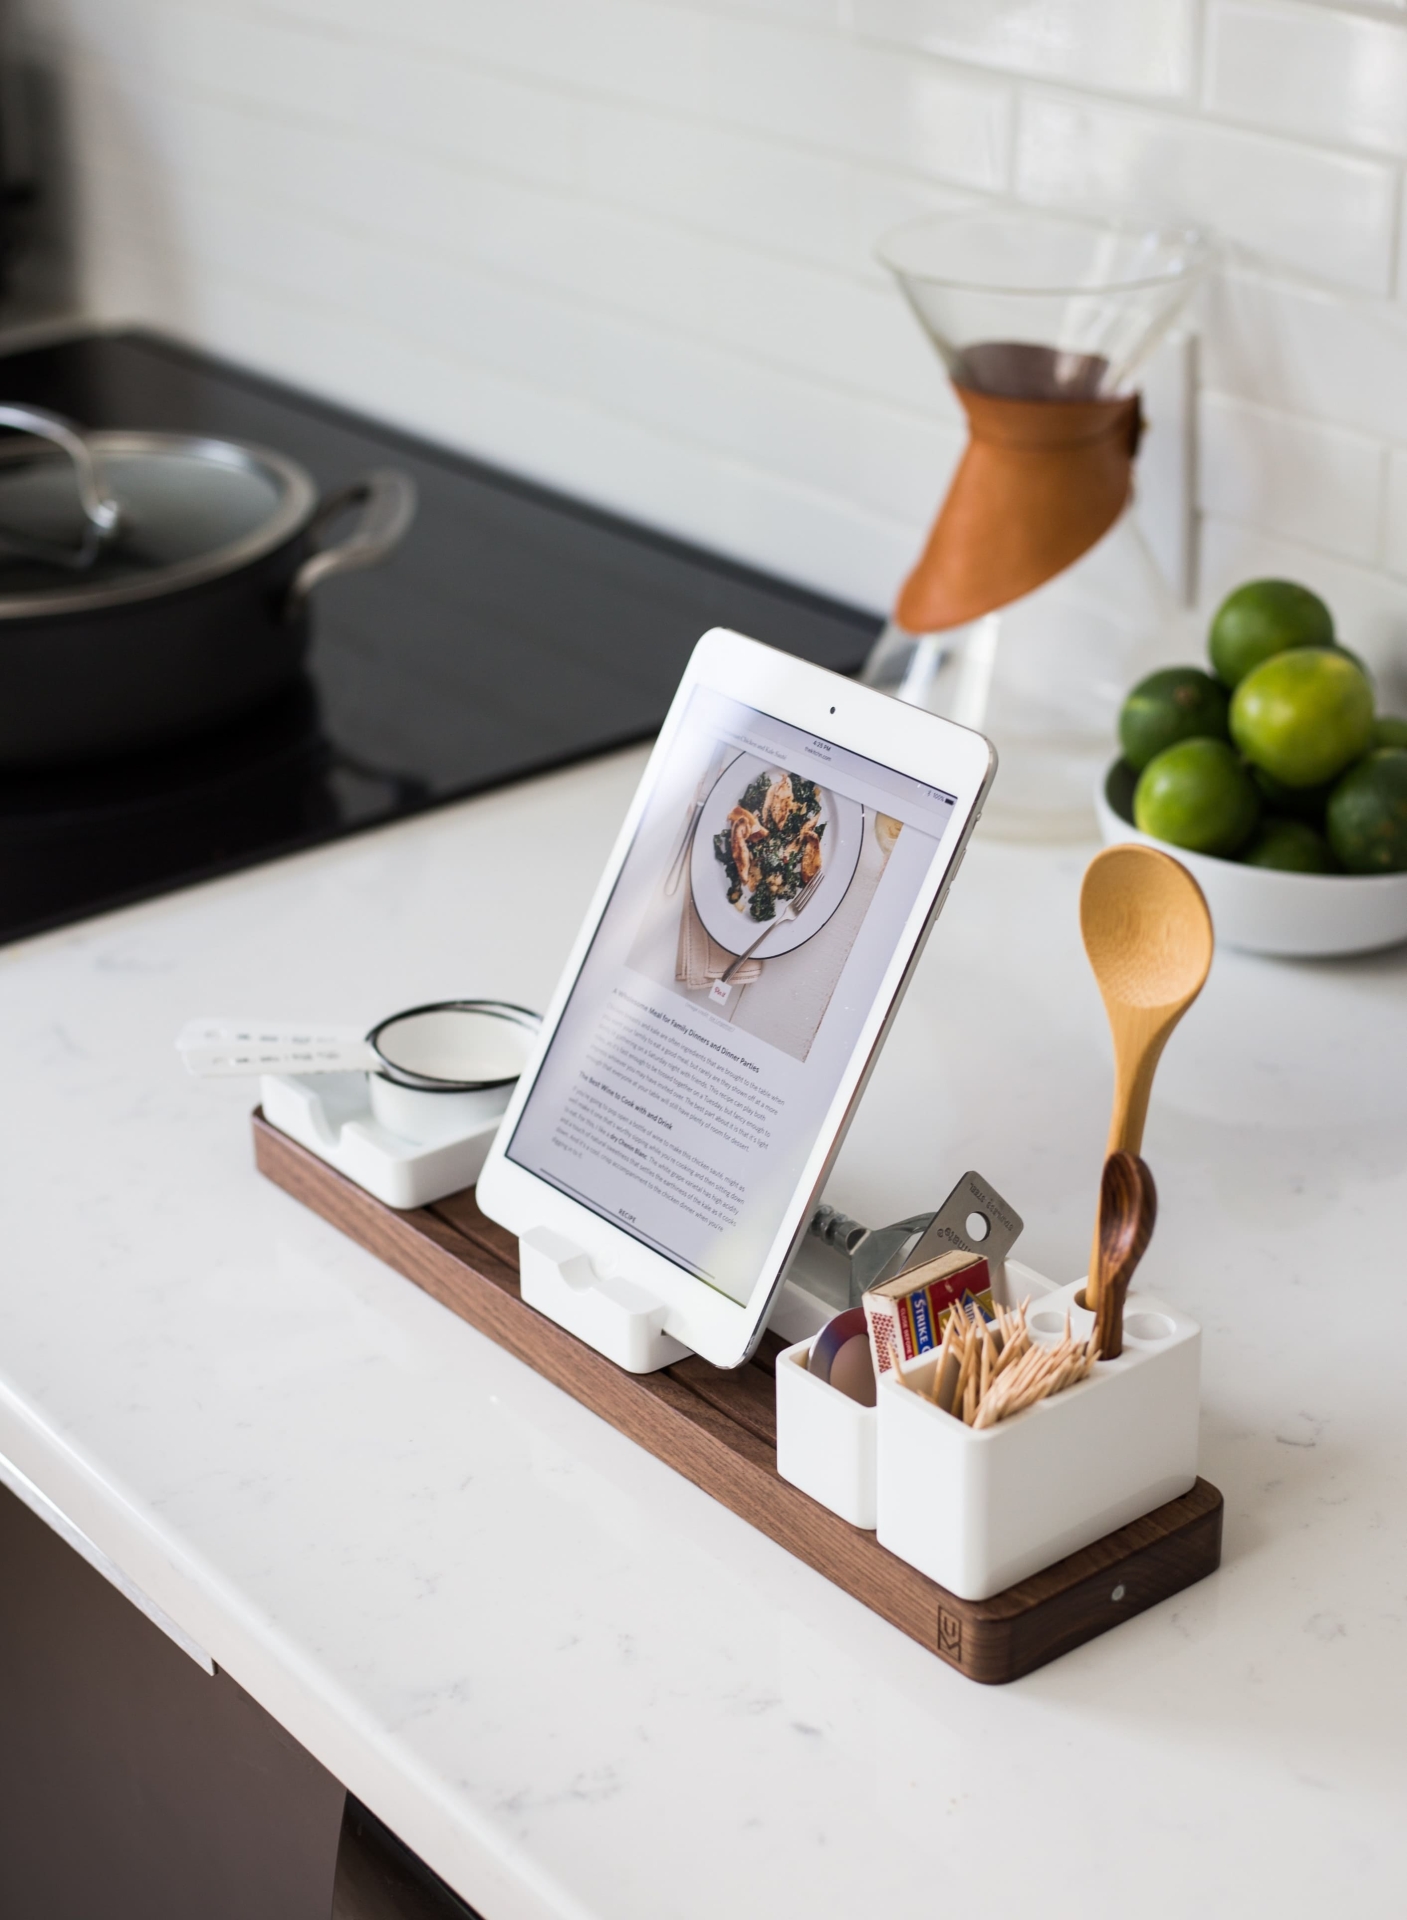 Kitchen Apps: Intelligent cooking, stocking and ordering